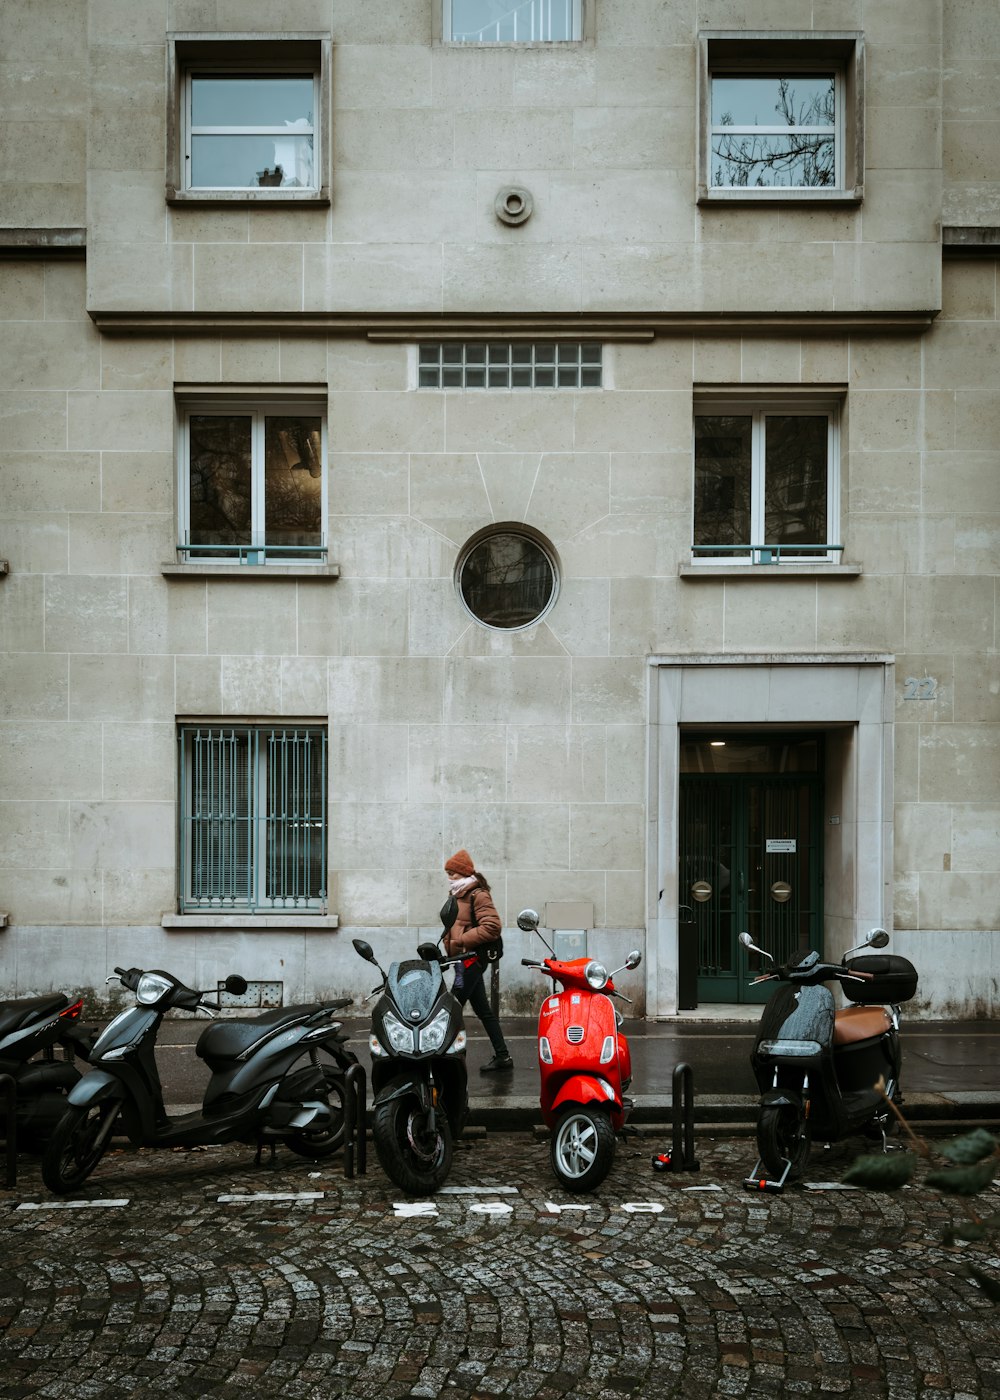 a group of scooters parked in front of a building